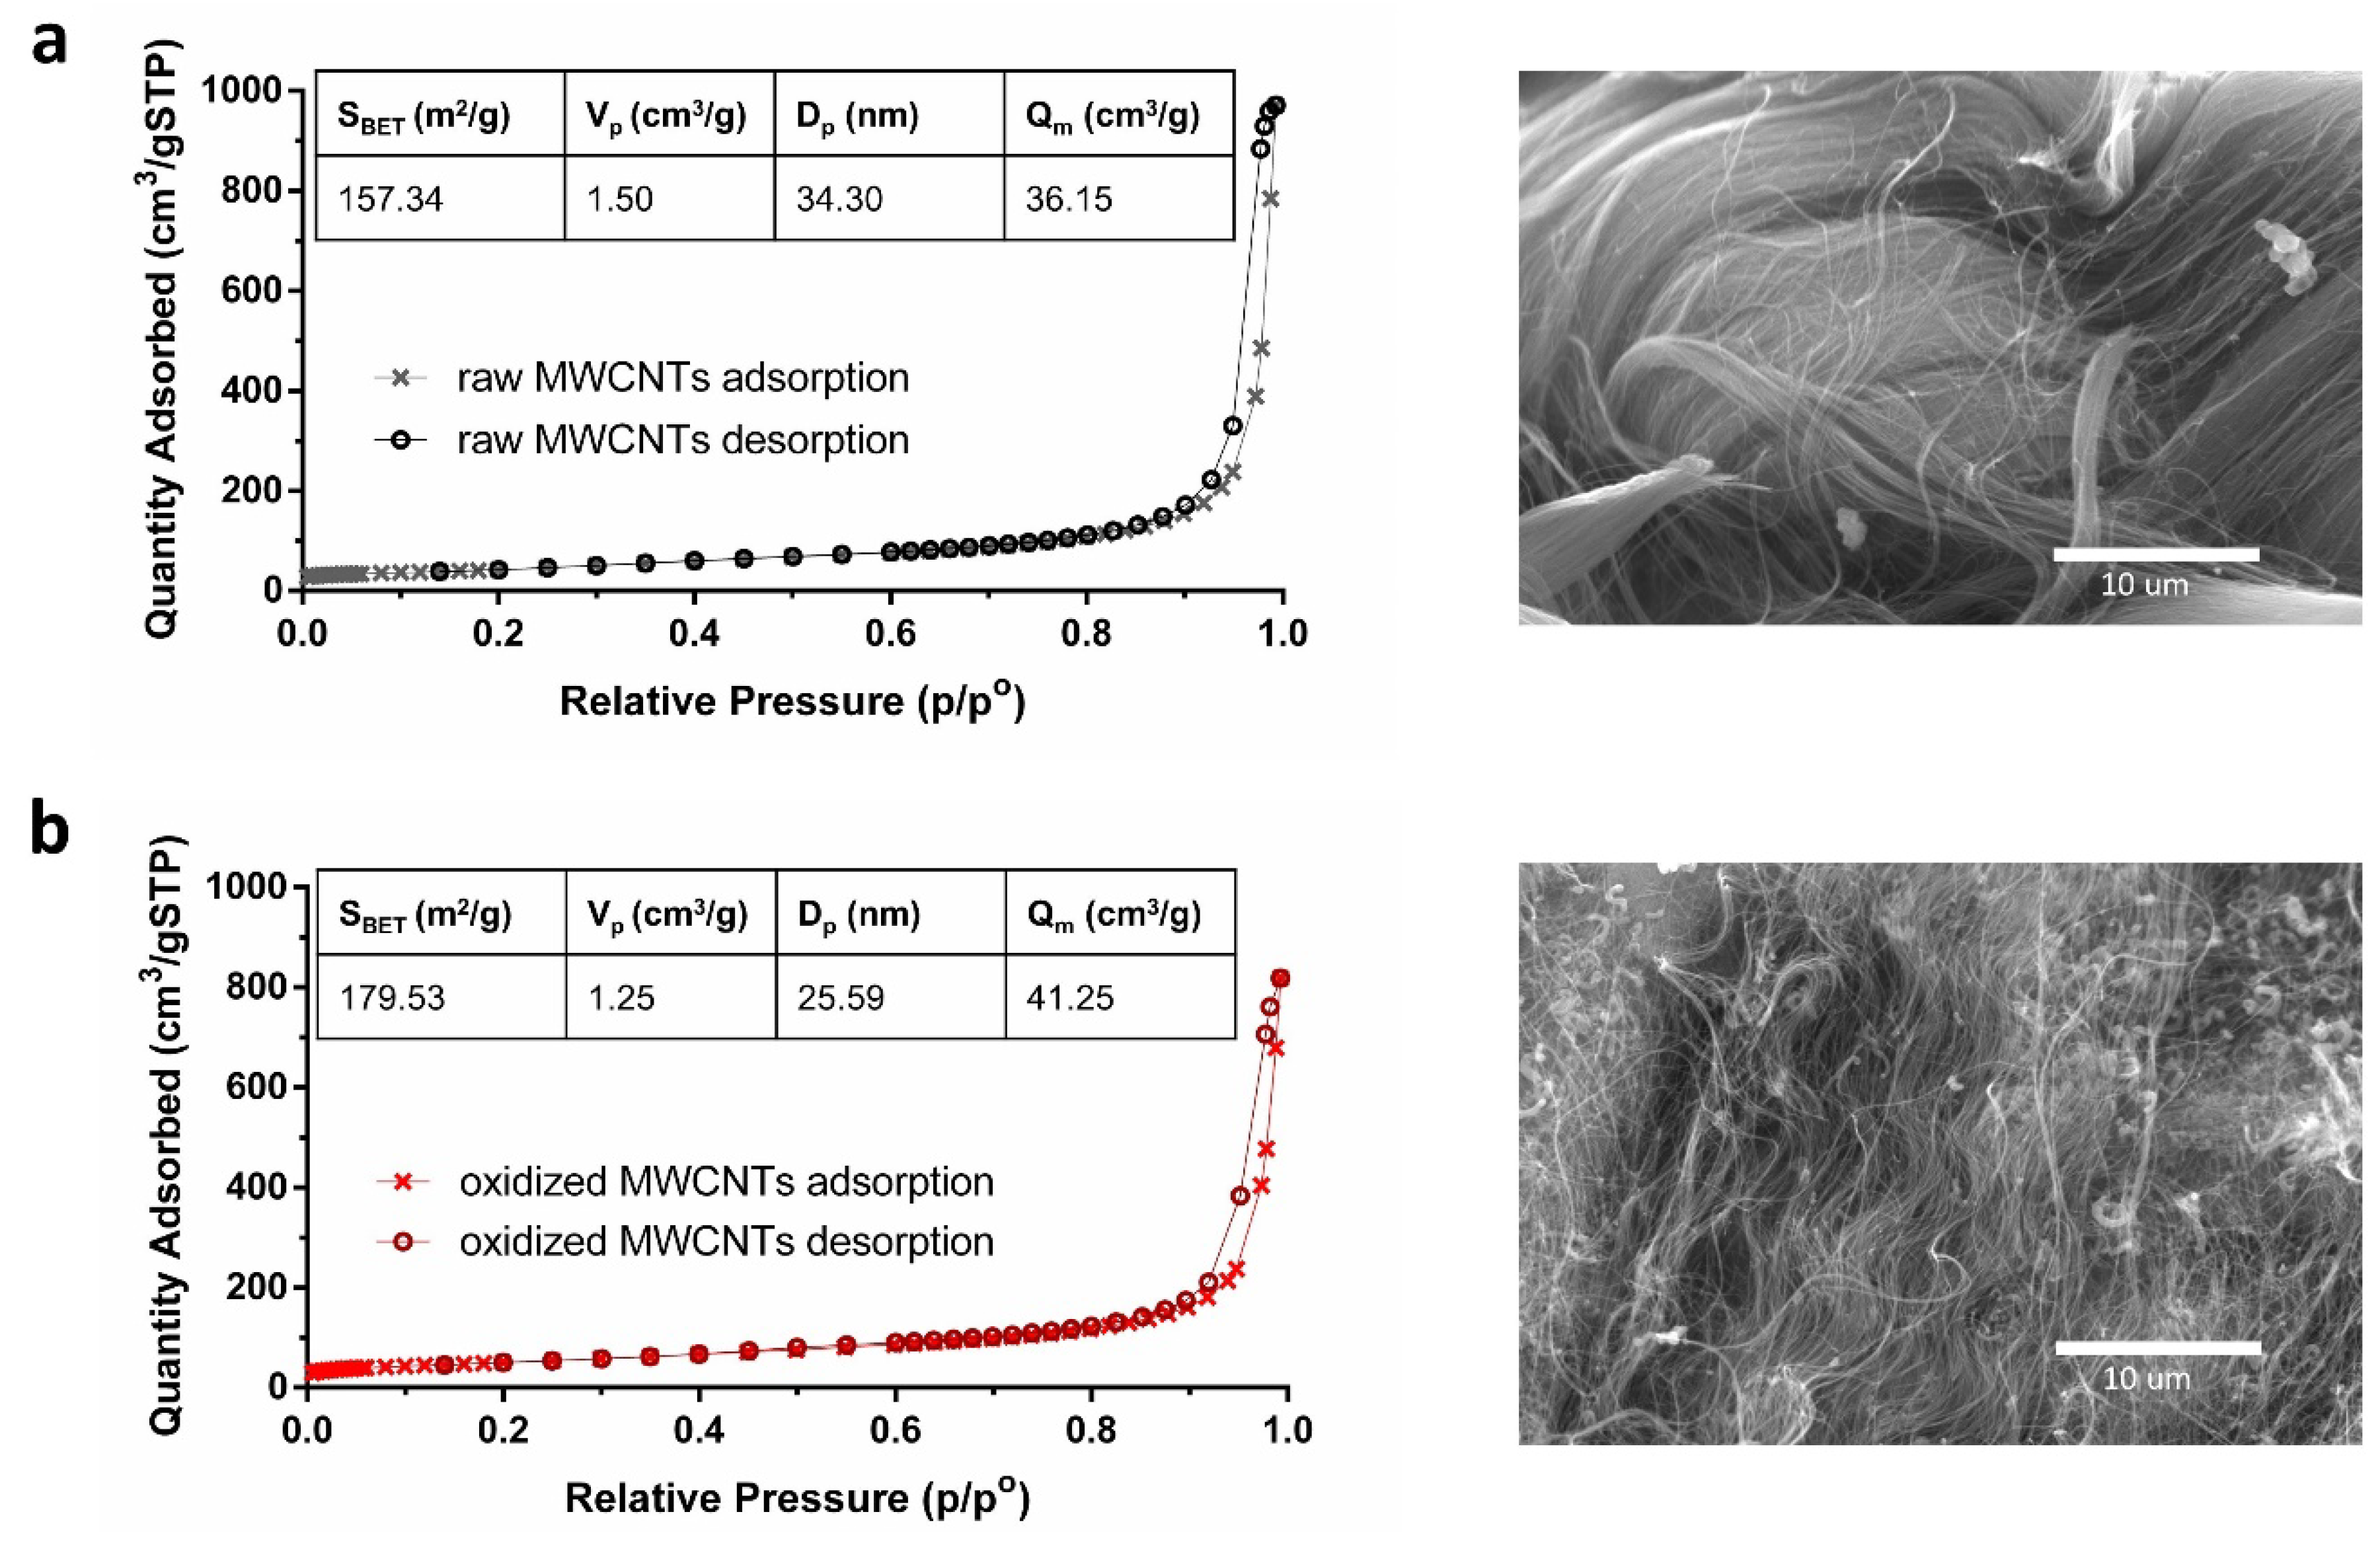 Molecules Free Full Text Increased Adsorption Of Heavy Metal Ions In Multi Walled Carbon Nanotubes With Improved Dispersion Stability Html